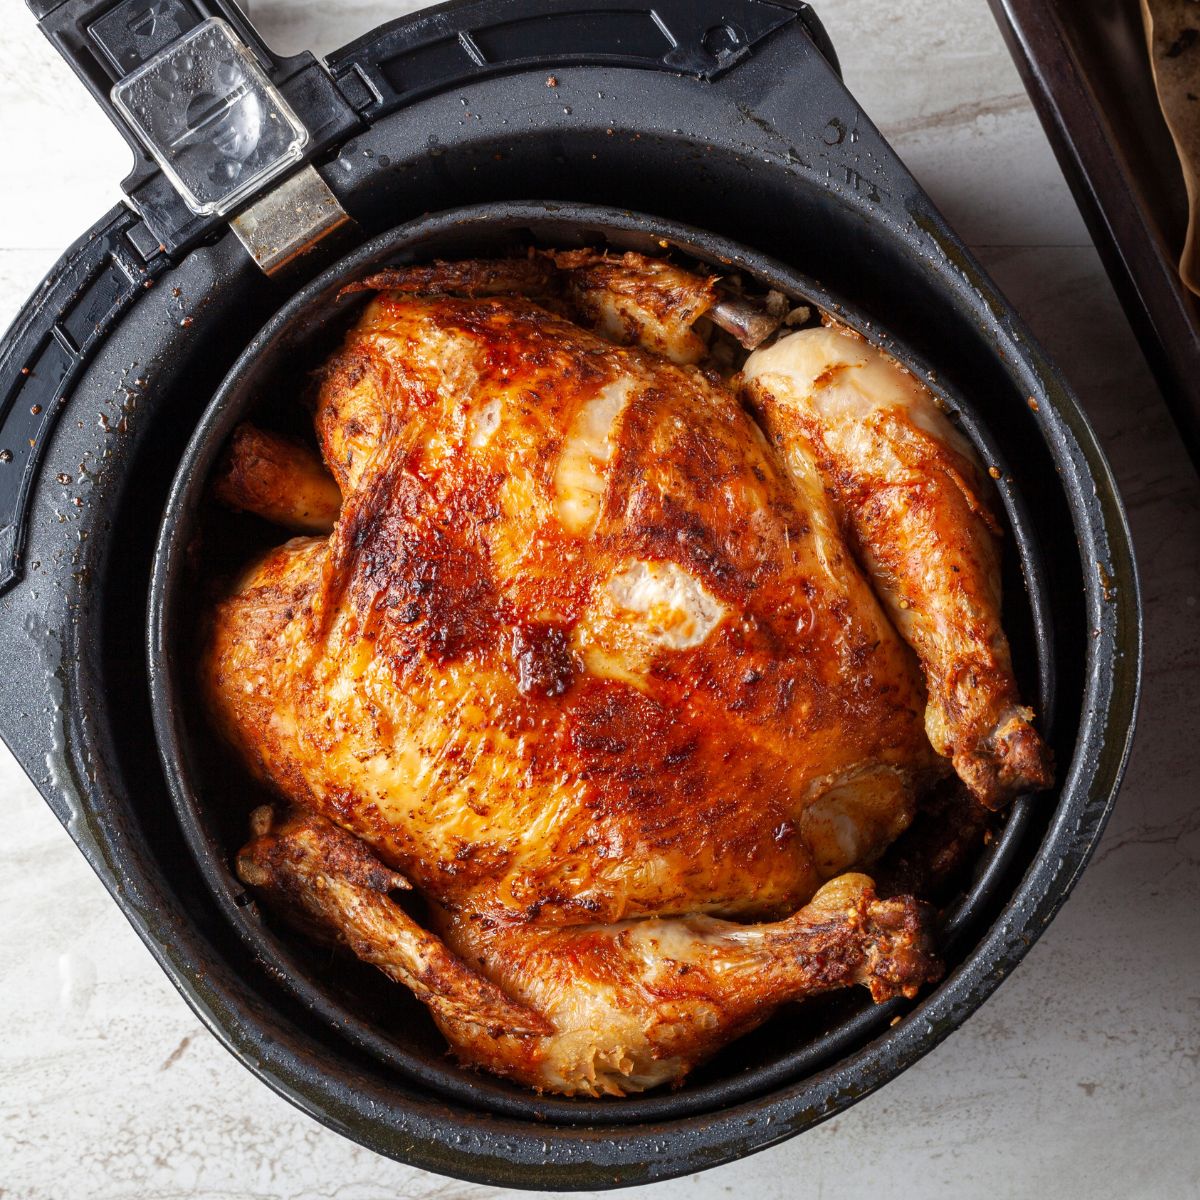 https://cottageatthecrossroads.com/wp-content/uploads/2023/09/37-delicious-air-fryer-whole-chicken-recipes-featured-recipe.jpg